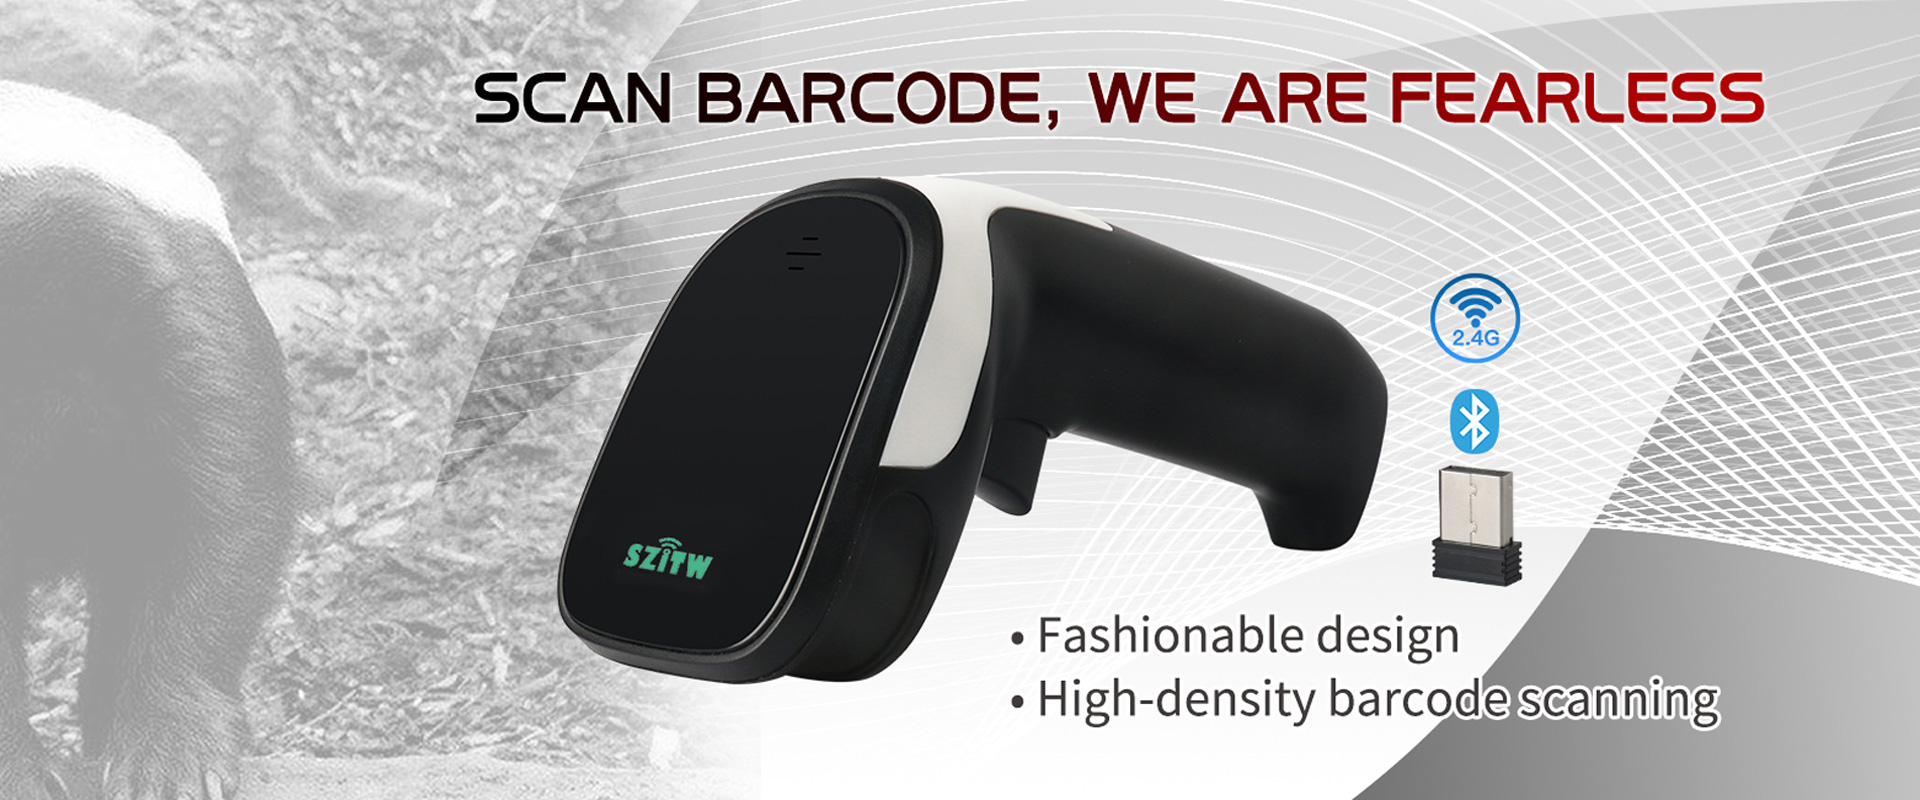 DS5210 barcode scanner